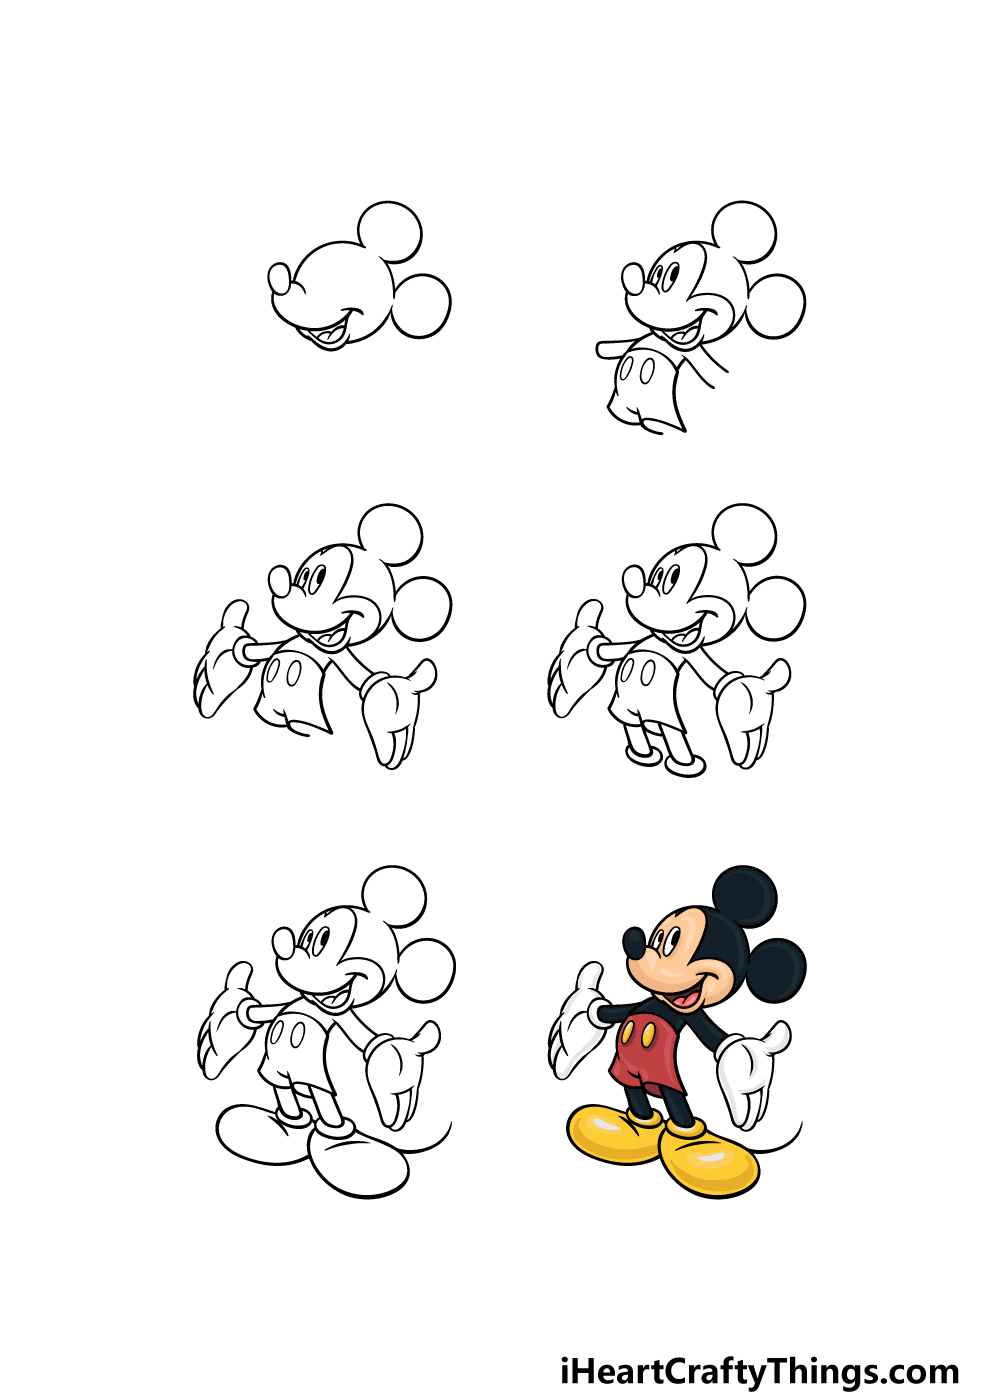 Cute Mickey Mouse Drawing - Step By Step tutorial - Cool Drawing Idea-saigonsouth.com.vn